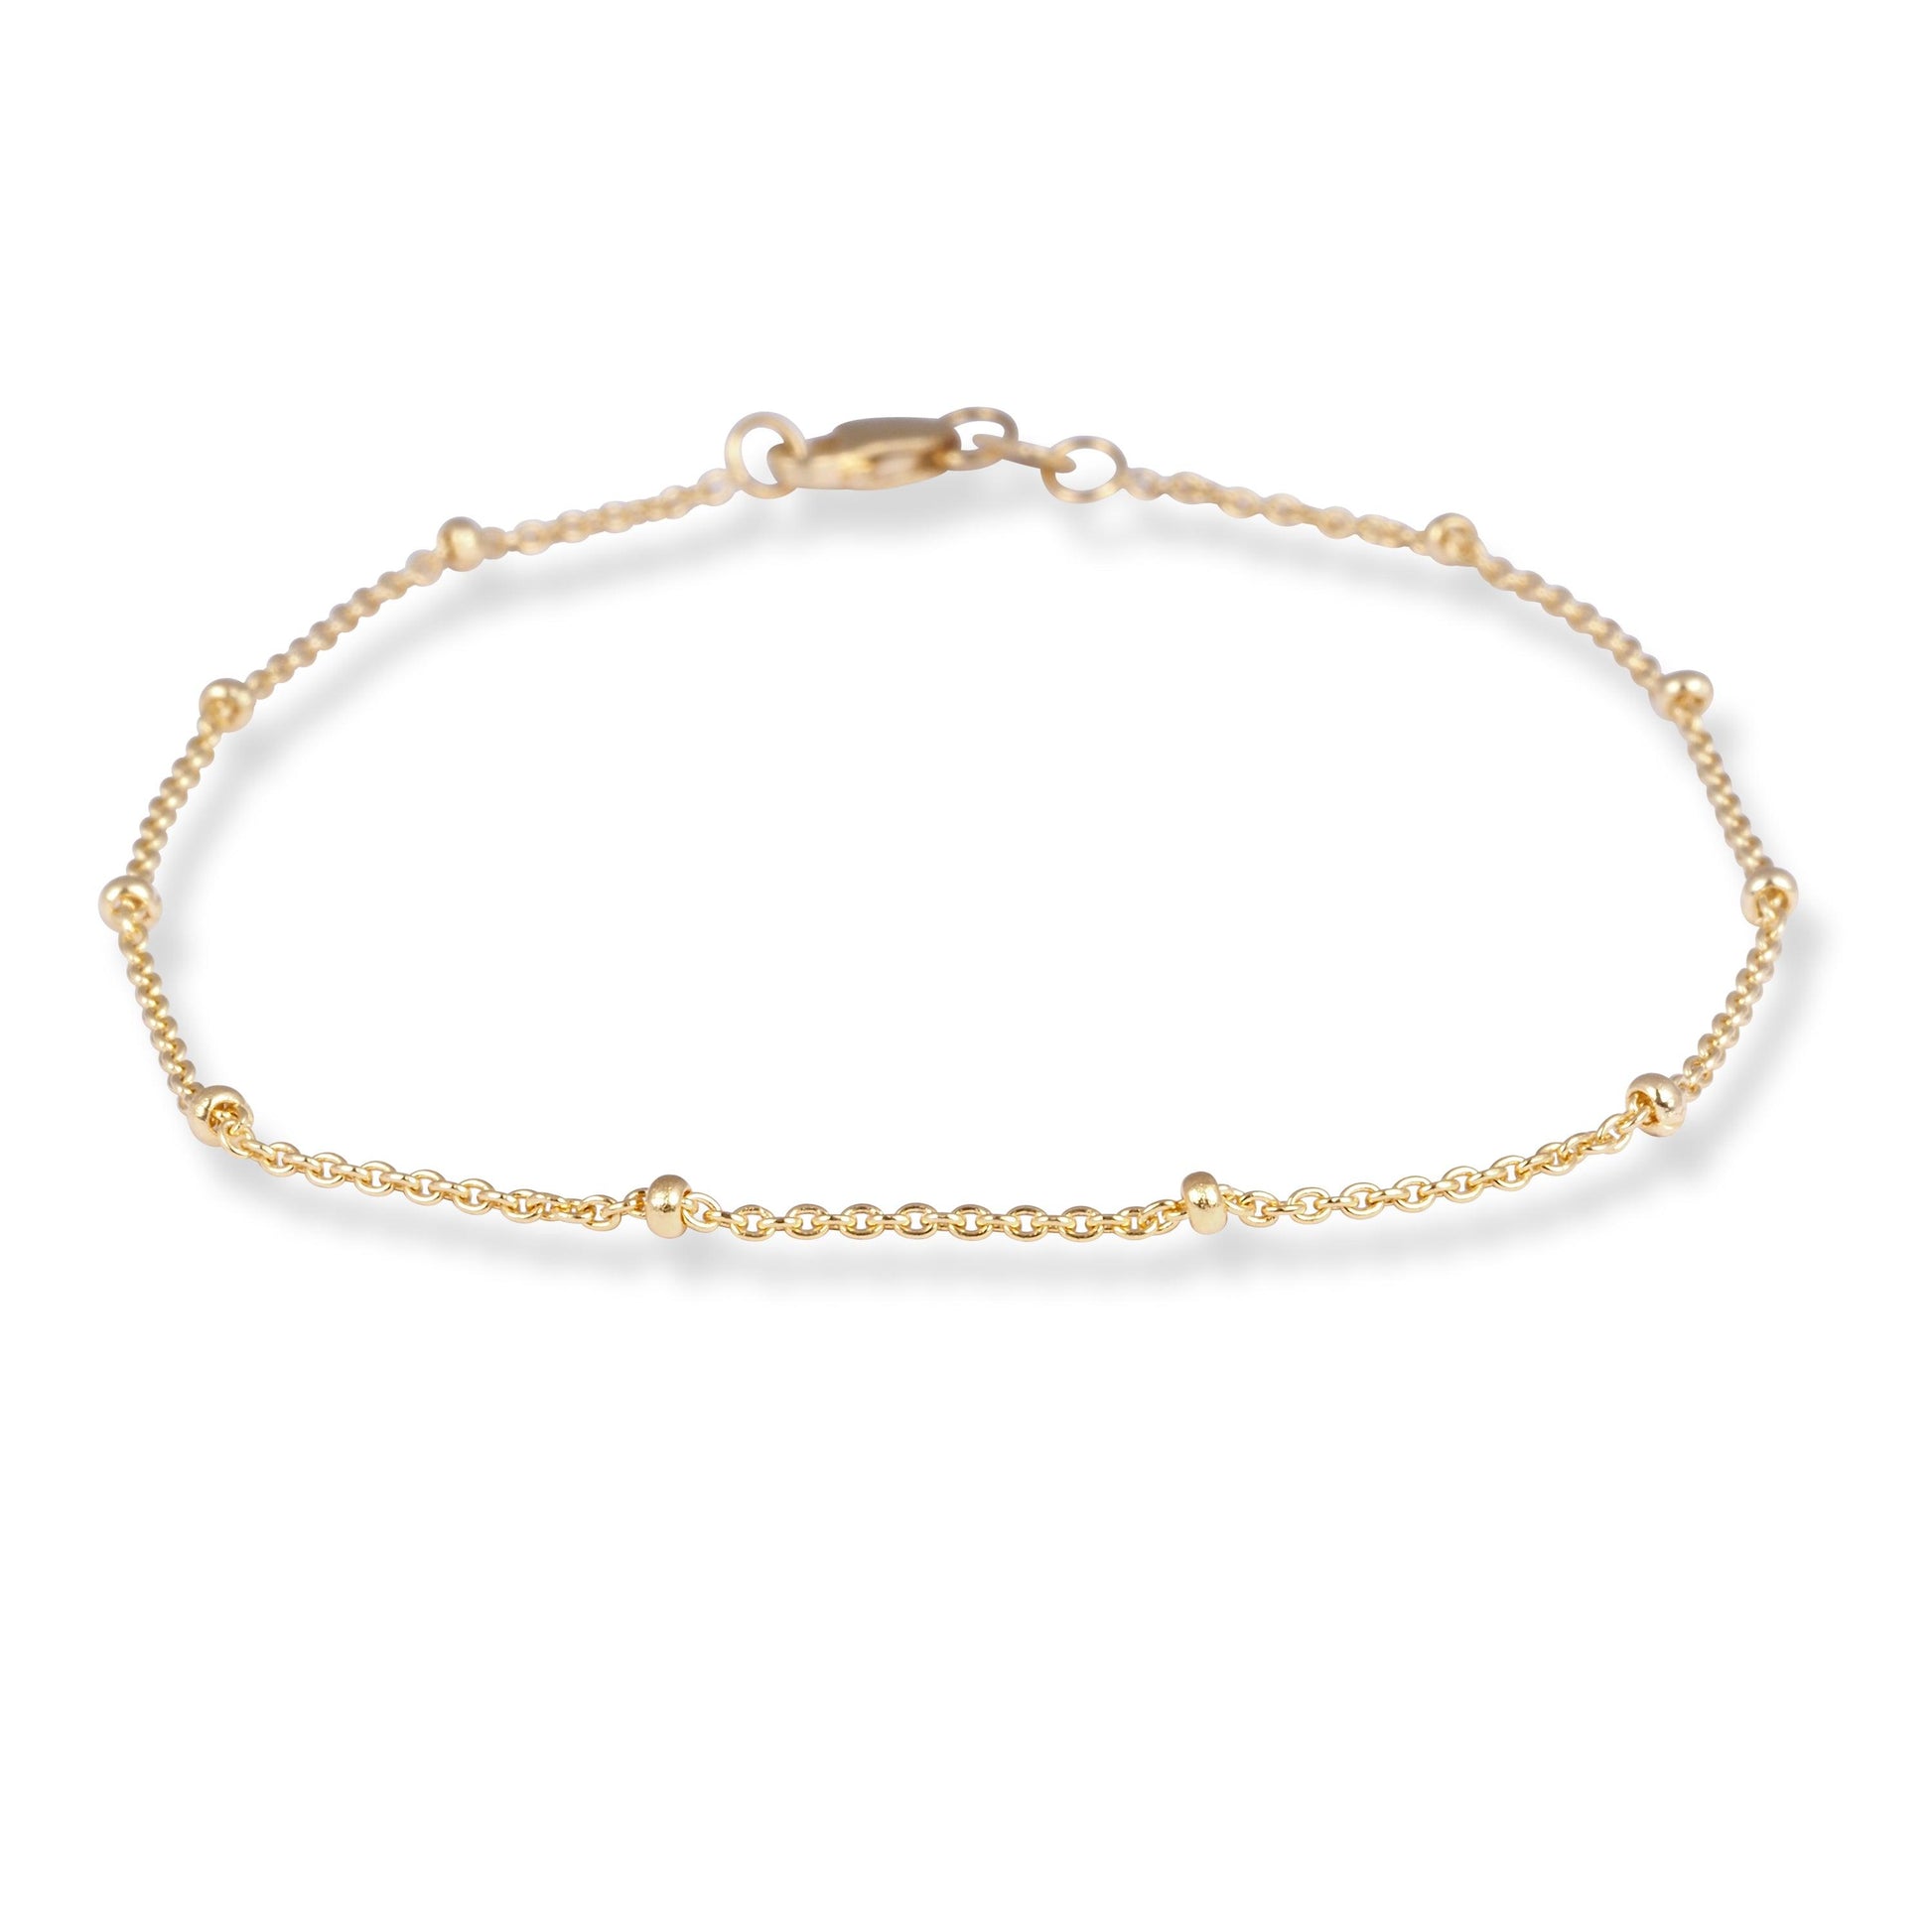 18ct Yellow Gold Lightweight Beaded Bracelet with Lobster Clasp LBR-8481 - Minar Jewellers